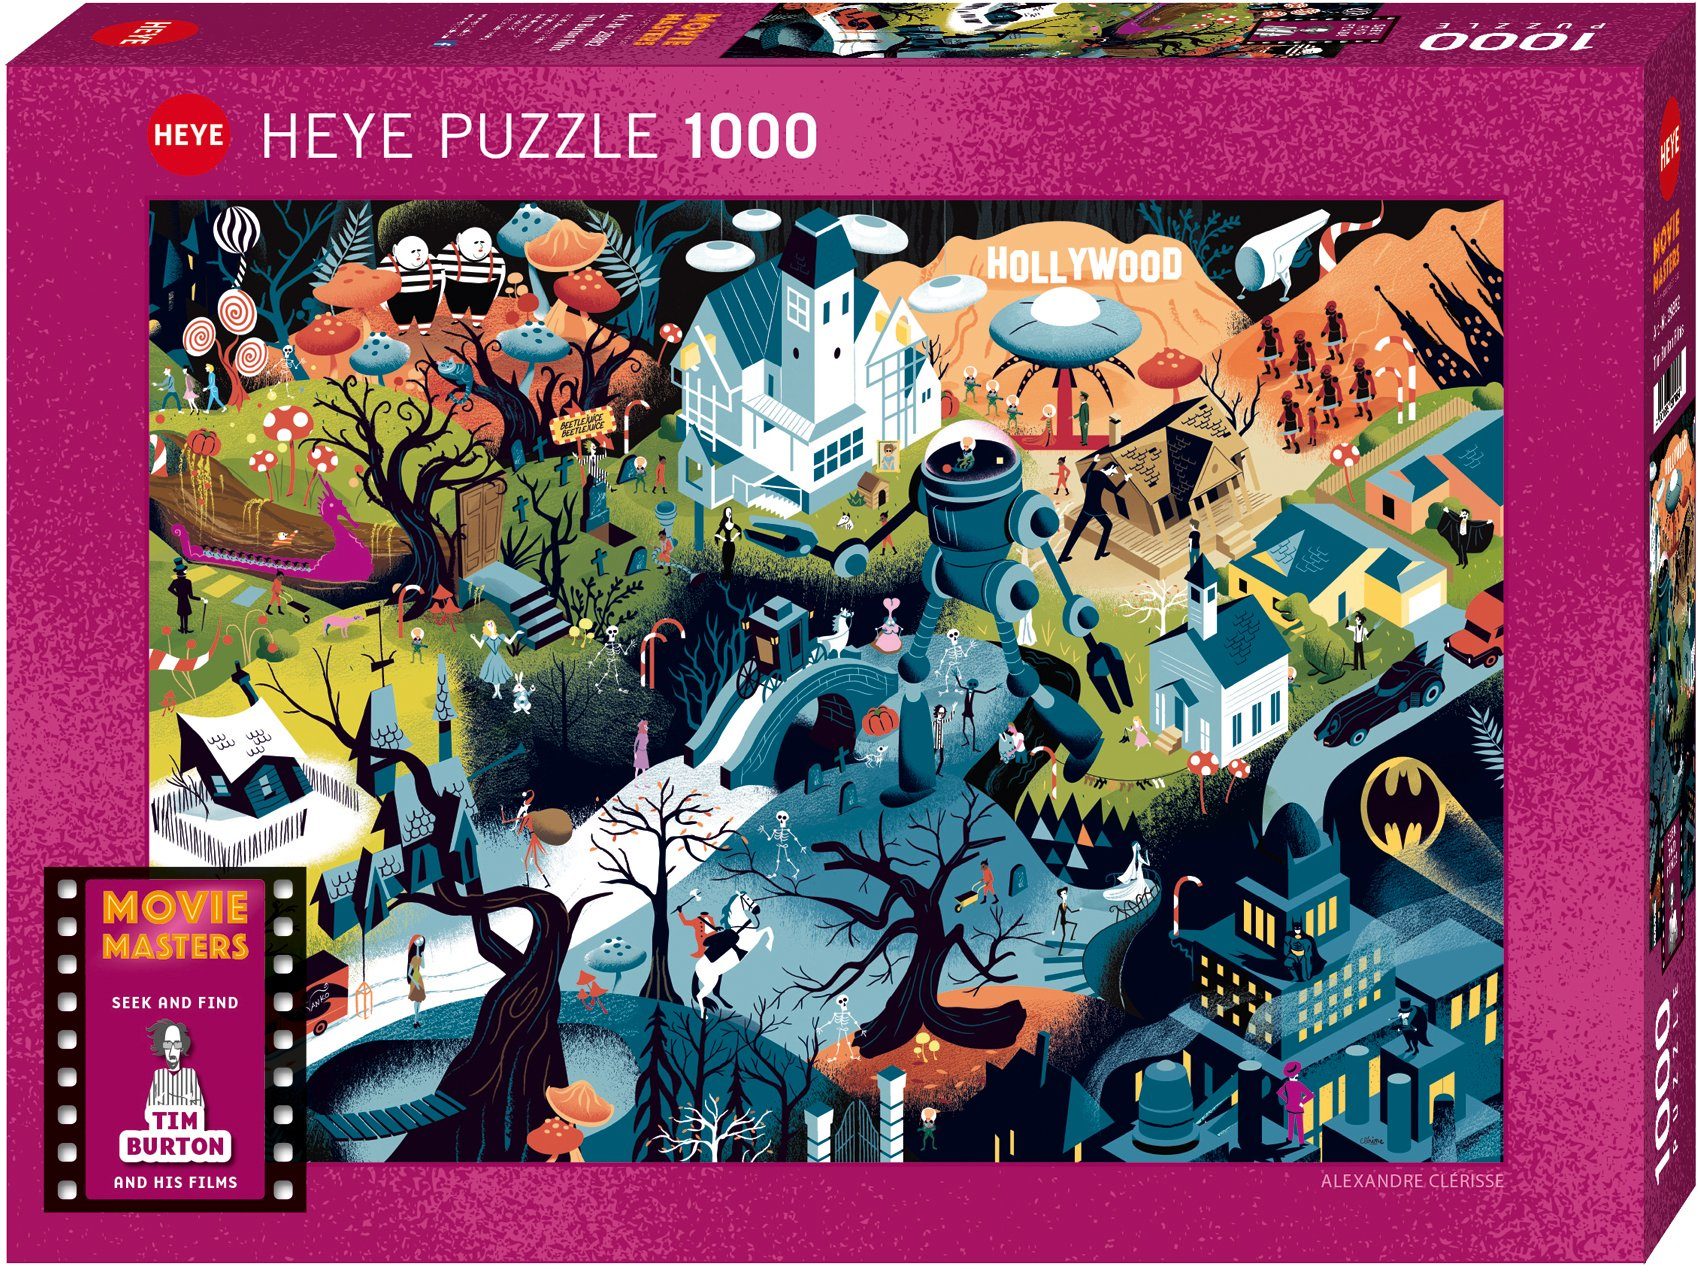 HEYE Tim in Germany Films, Puzzleteile, Puzzle Made Burton 1000